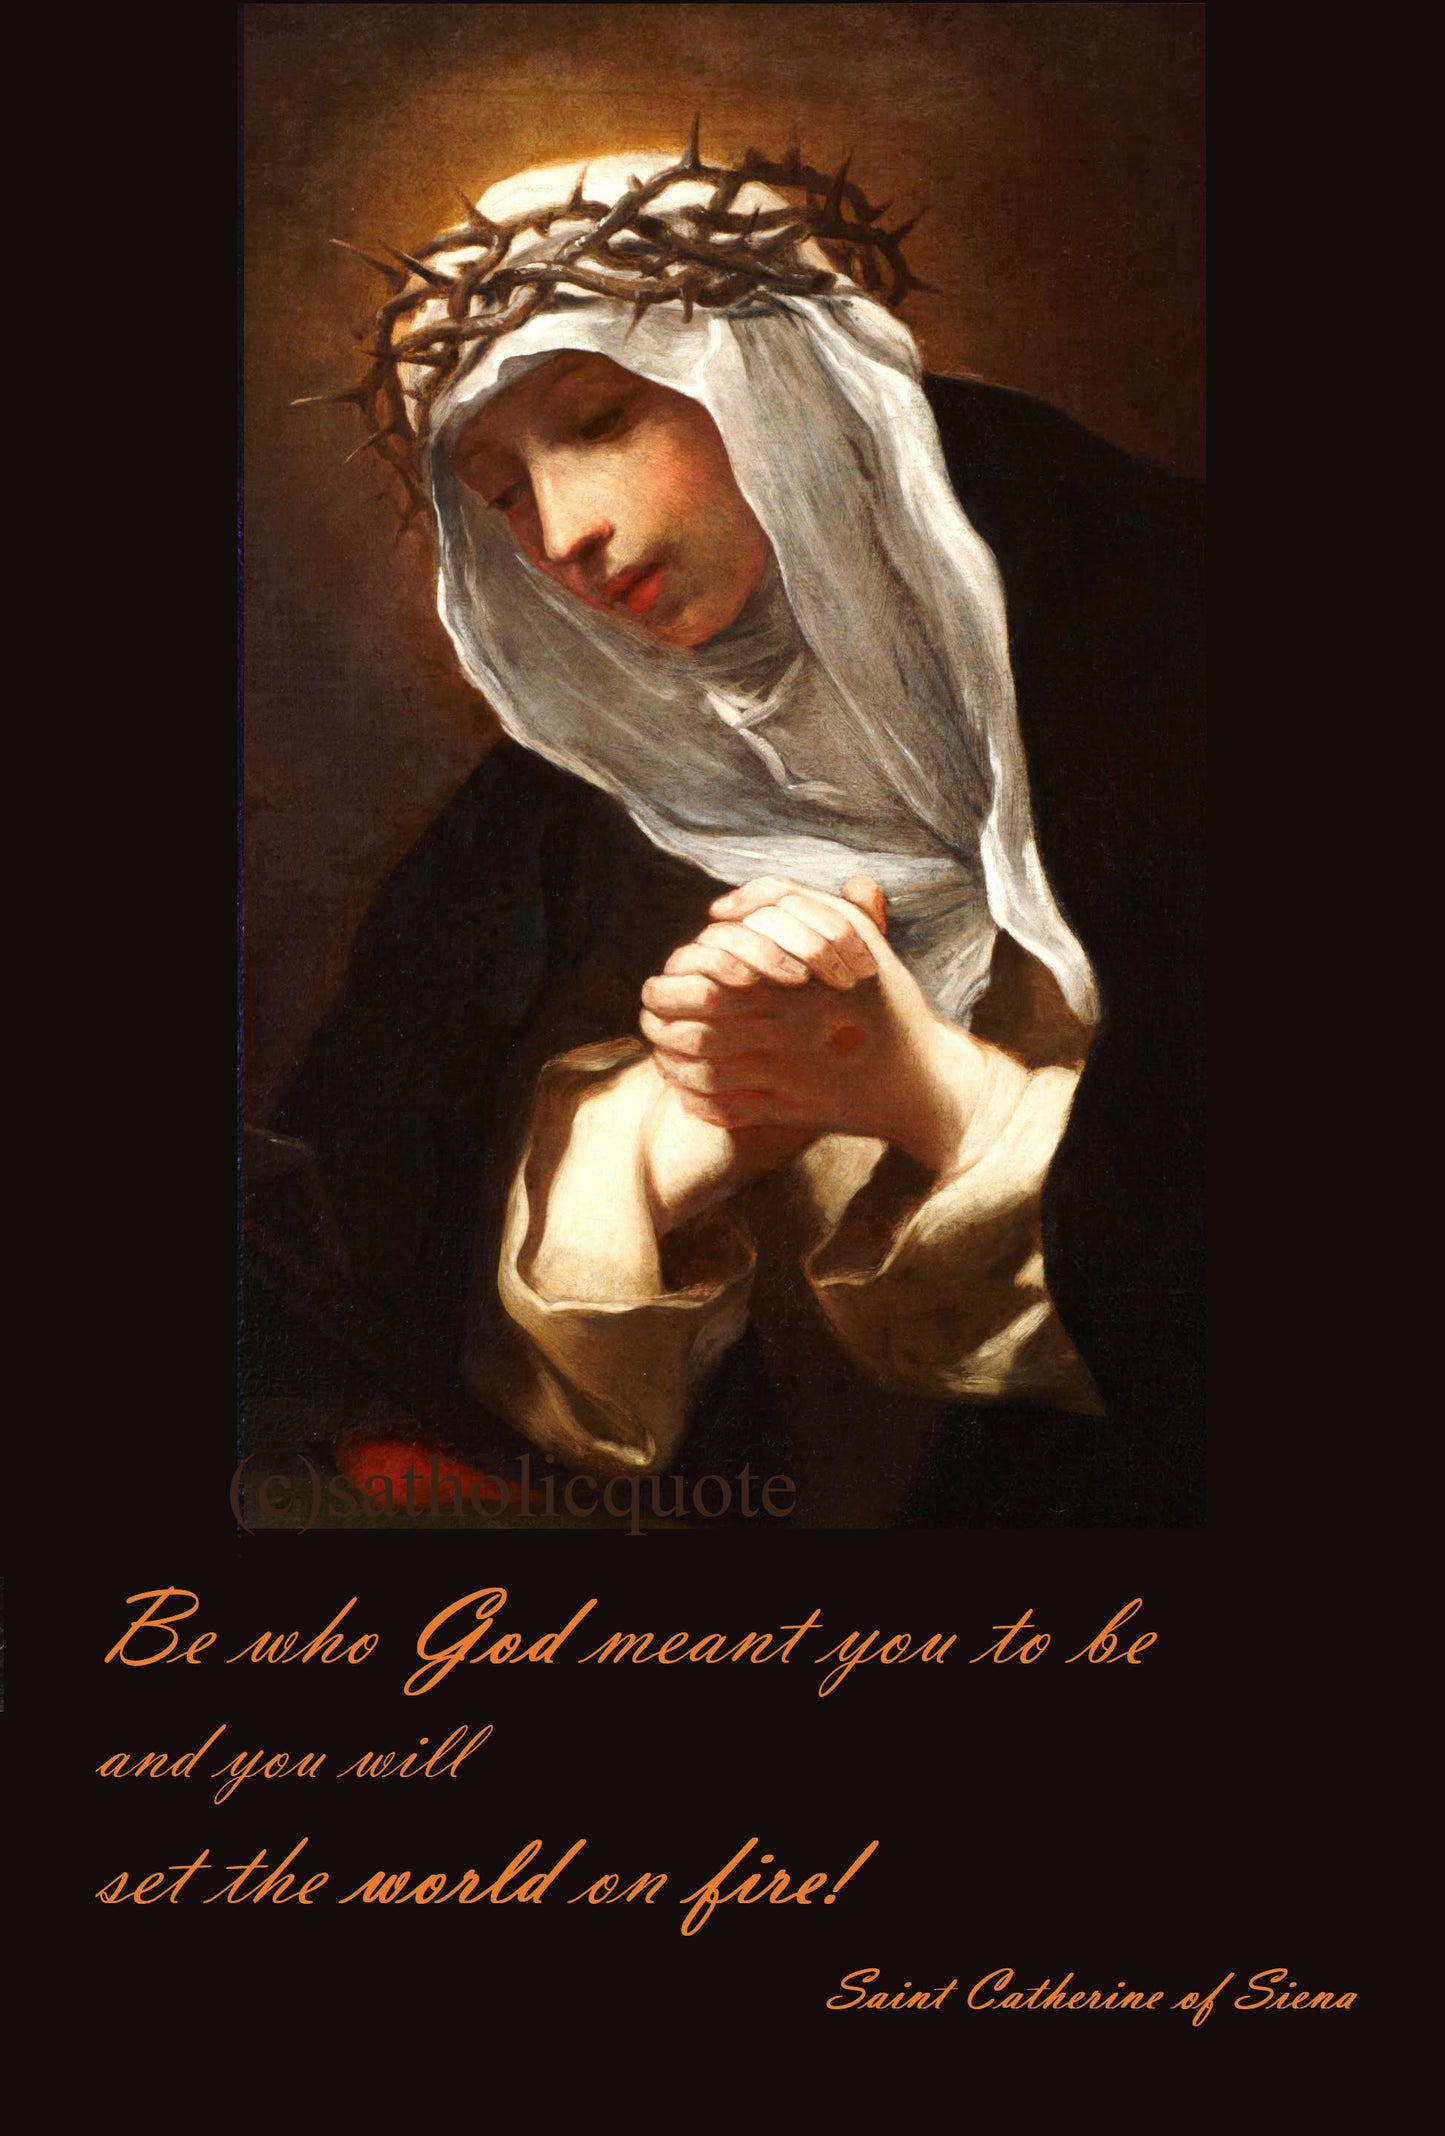 Catherine of Siena quote – set the world on fire – 8.5x11" – Catholic Art Print – Archival Quality– Authentic Quote